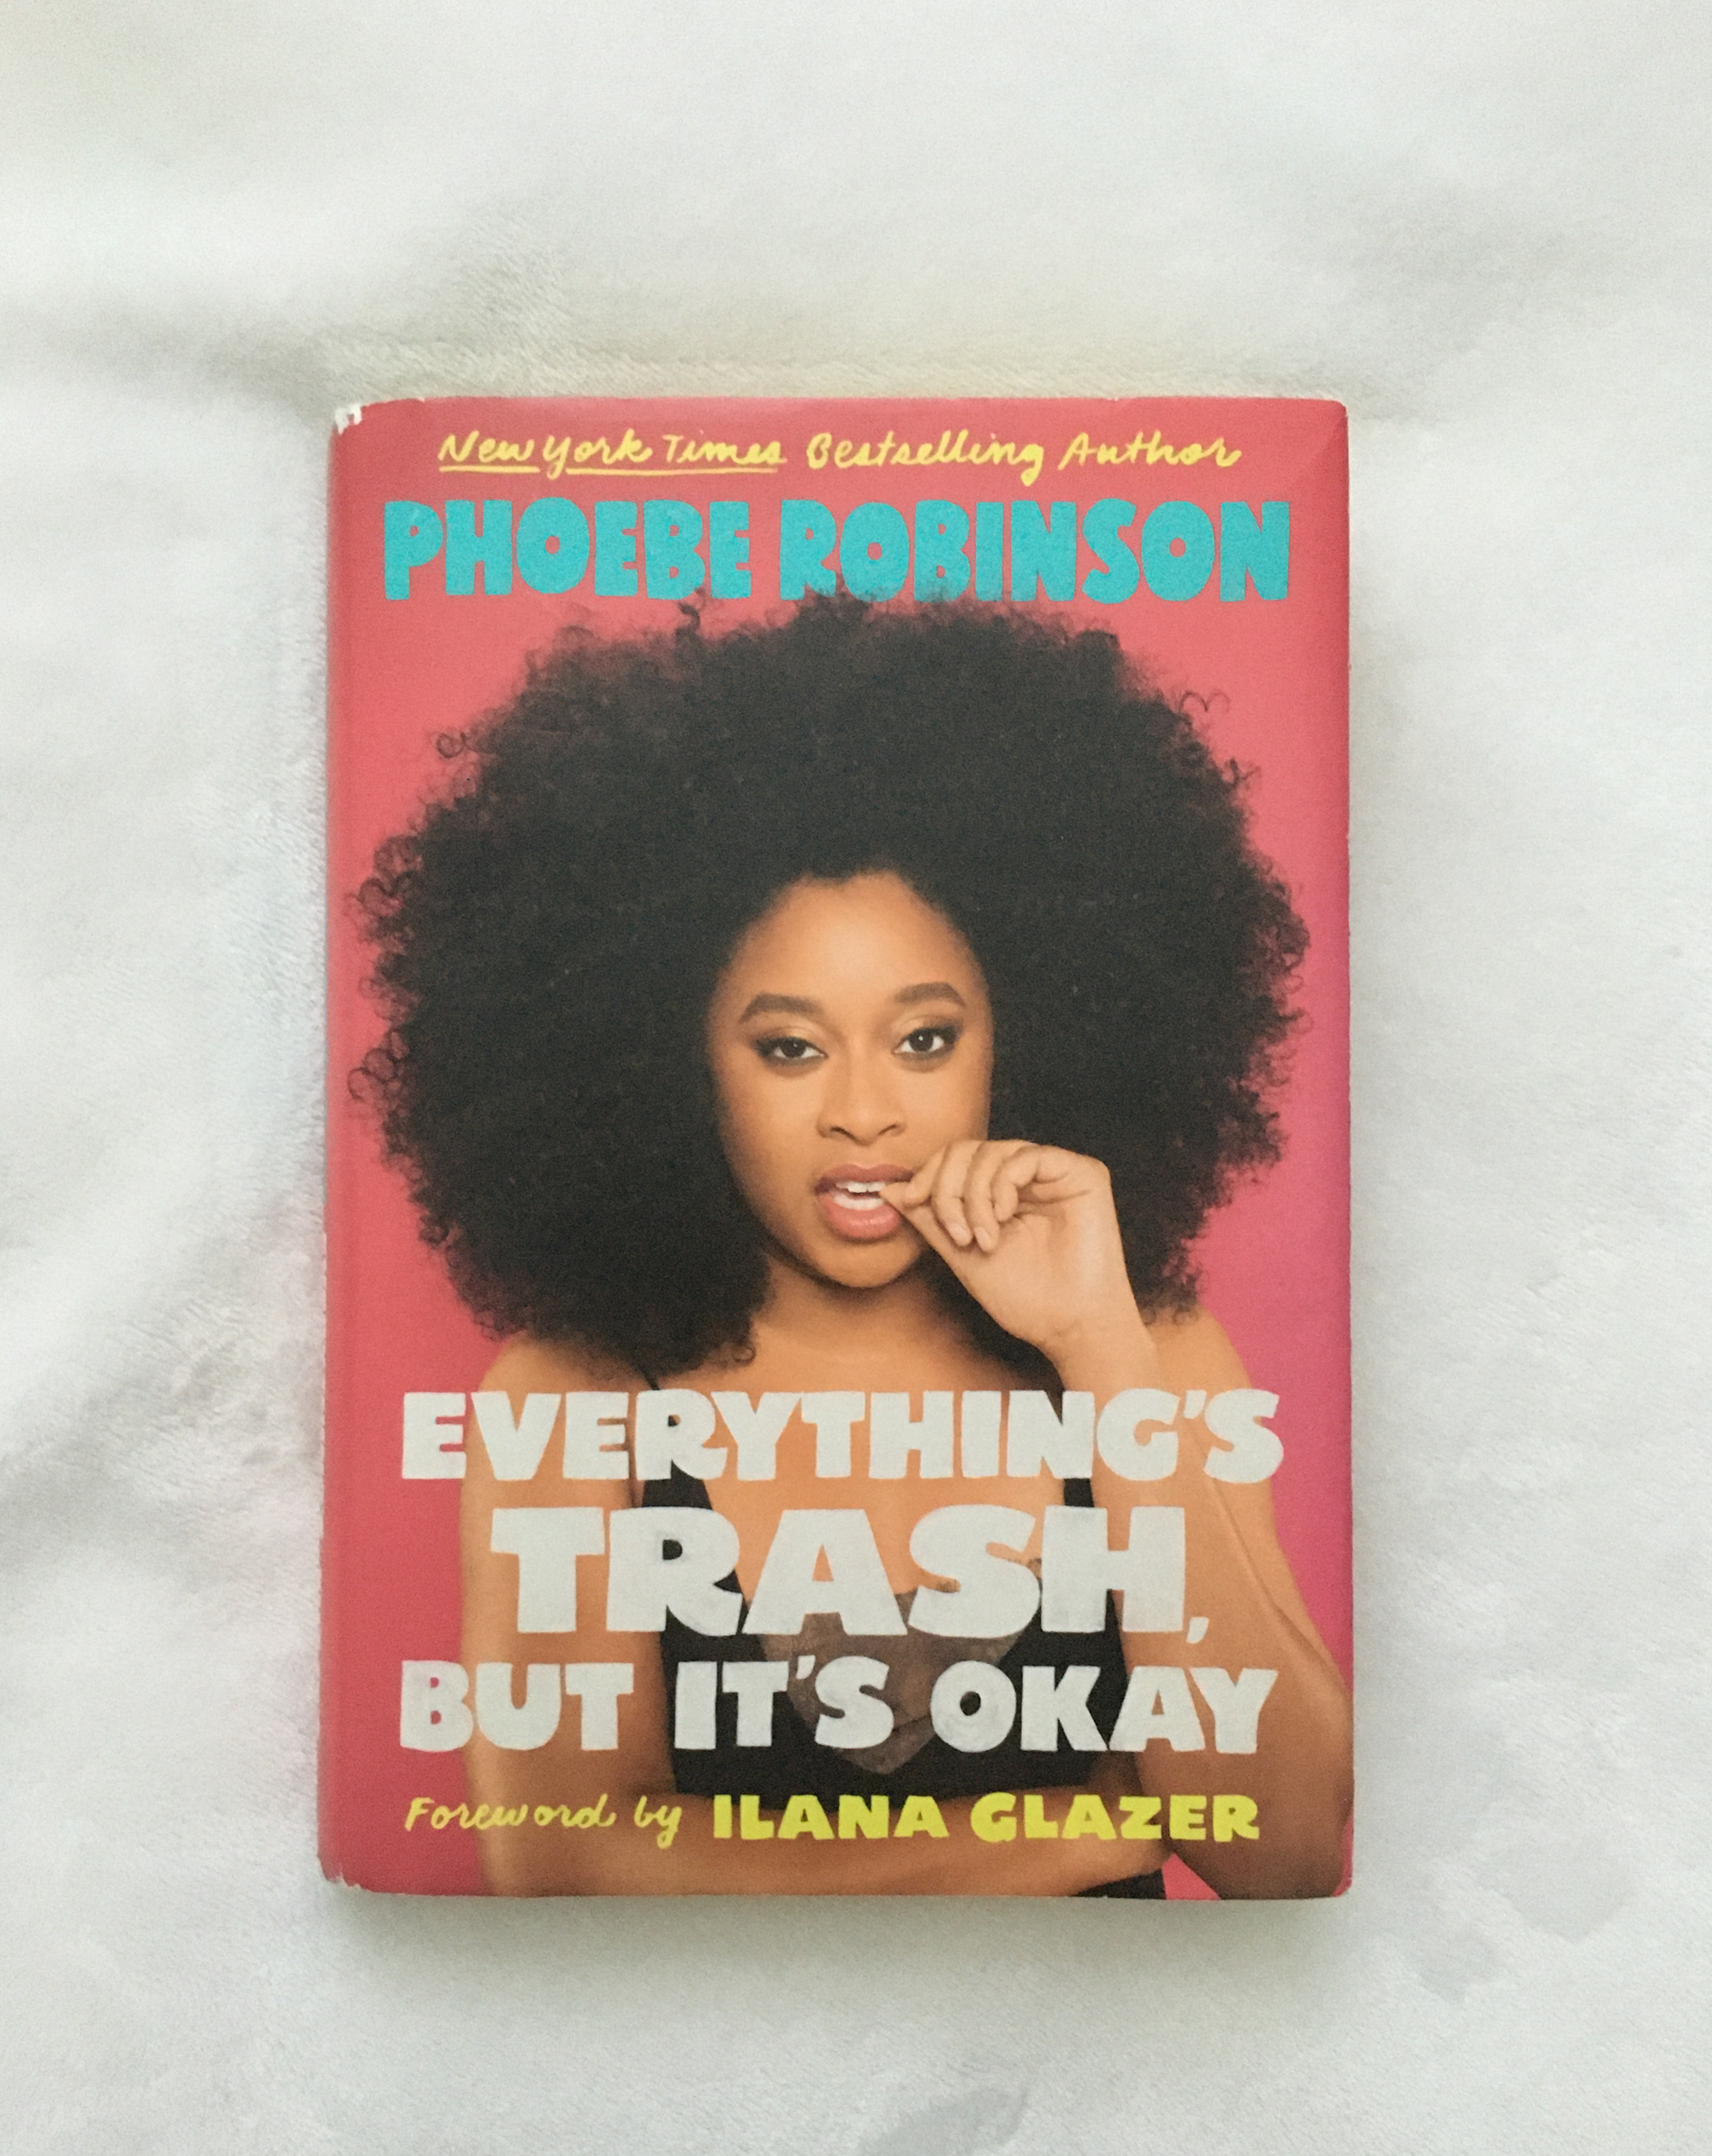 Everything's Trash, but That's Okay by Phoebe Robinson, book, Ten Dollar Books, Ten Dollar Books